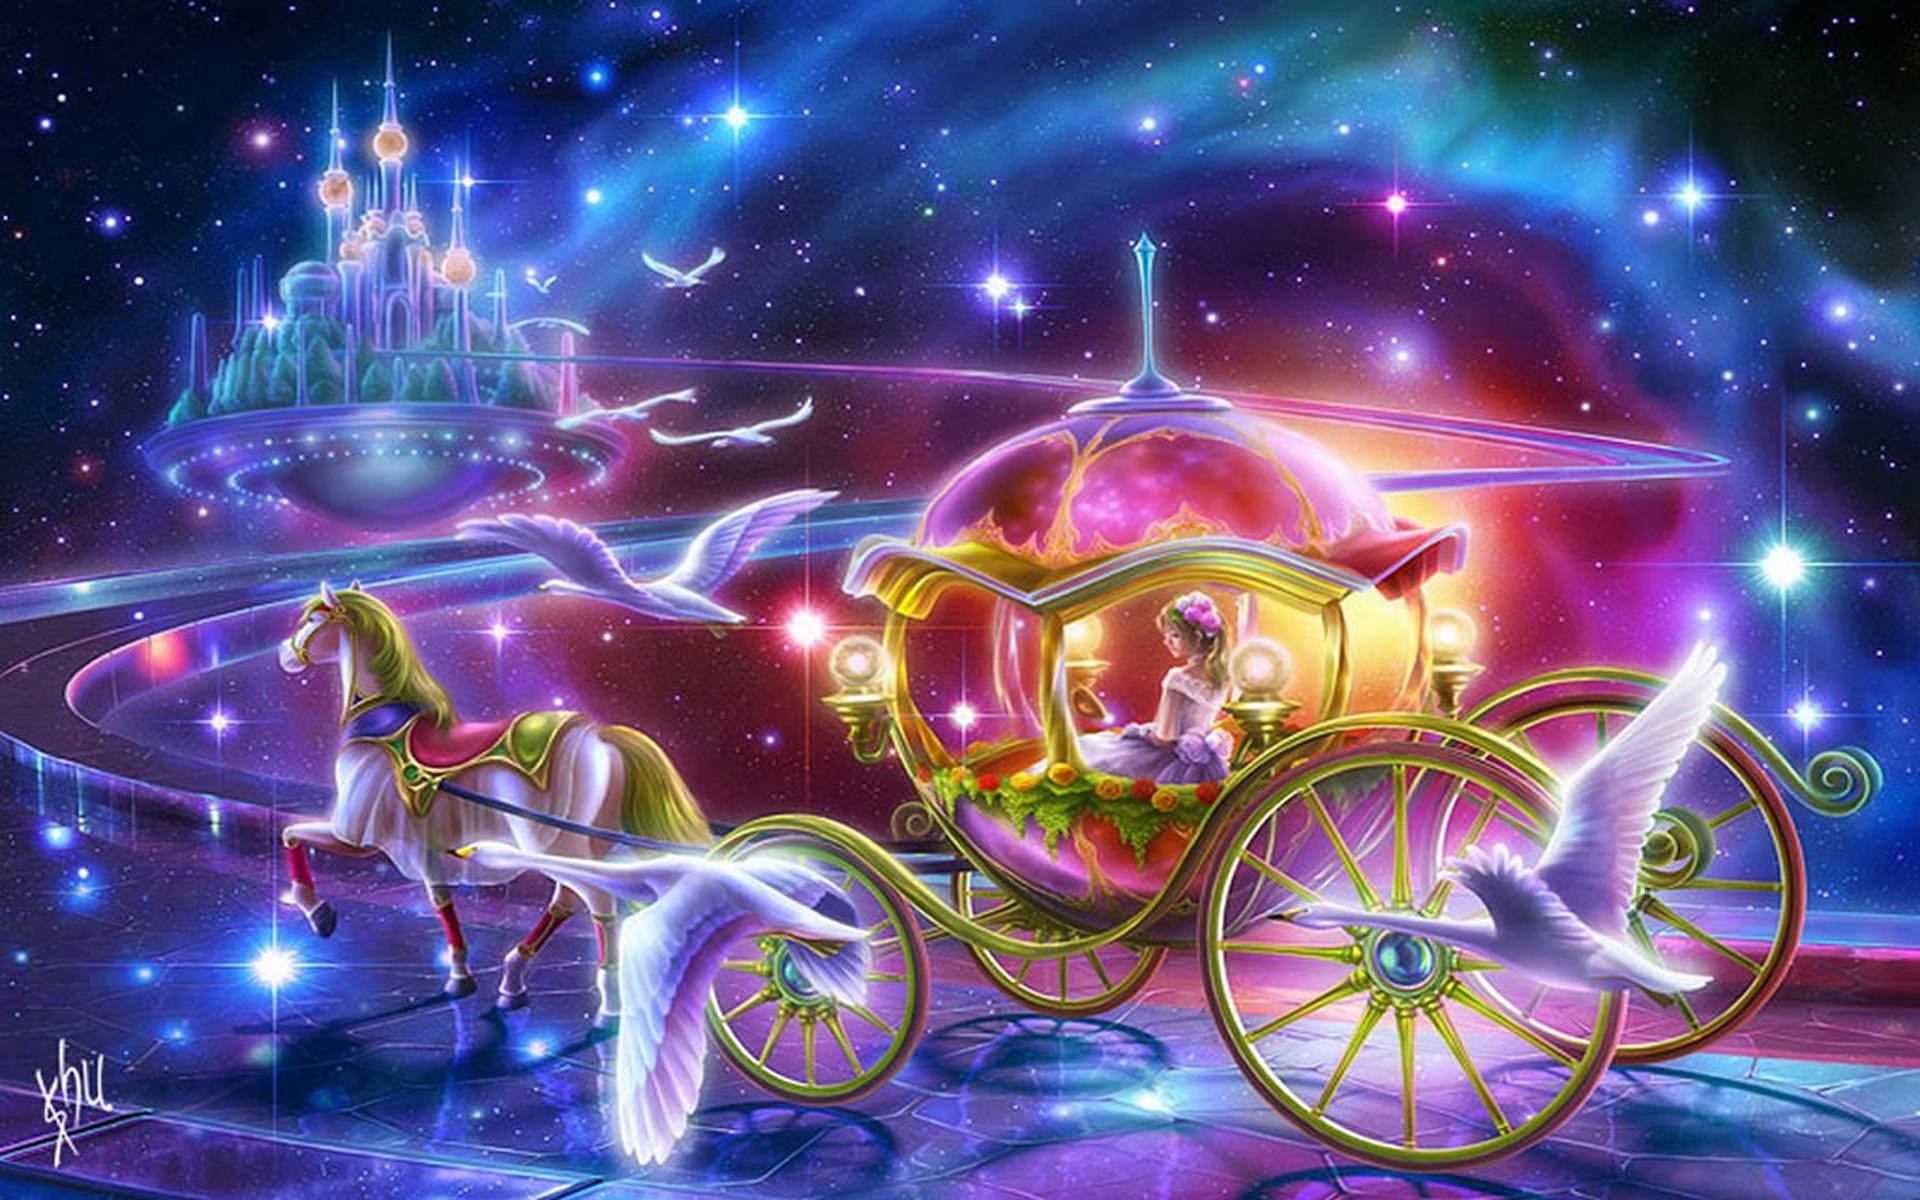 Royal Chaotic With Cinderella Direct To Royal Palace Desktop Hd Wallpaper  For Mobile Phones Tablet And Pc 1920x1200 : 